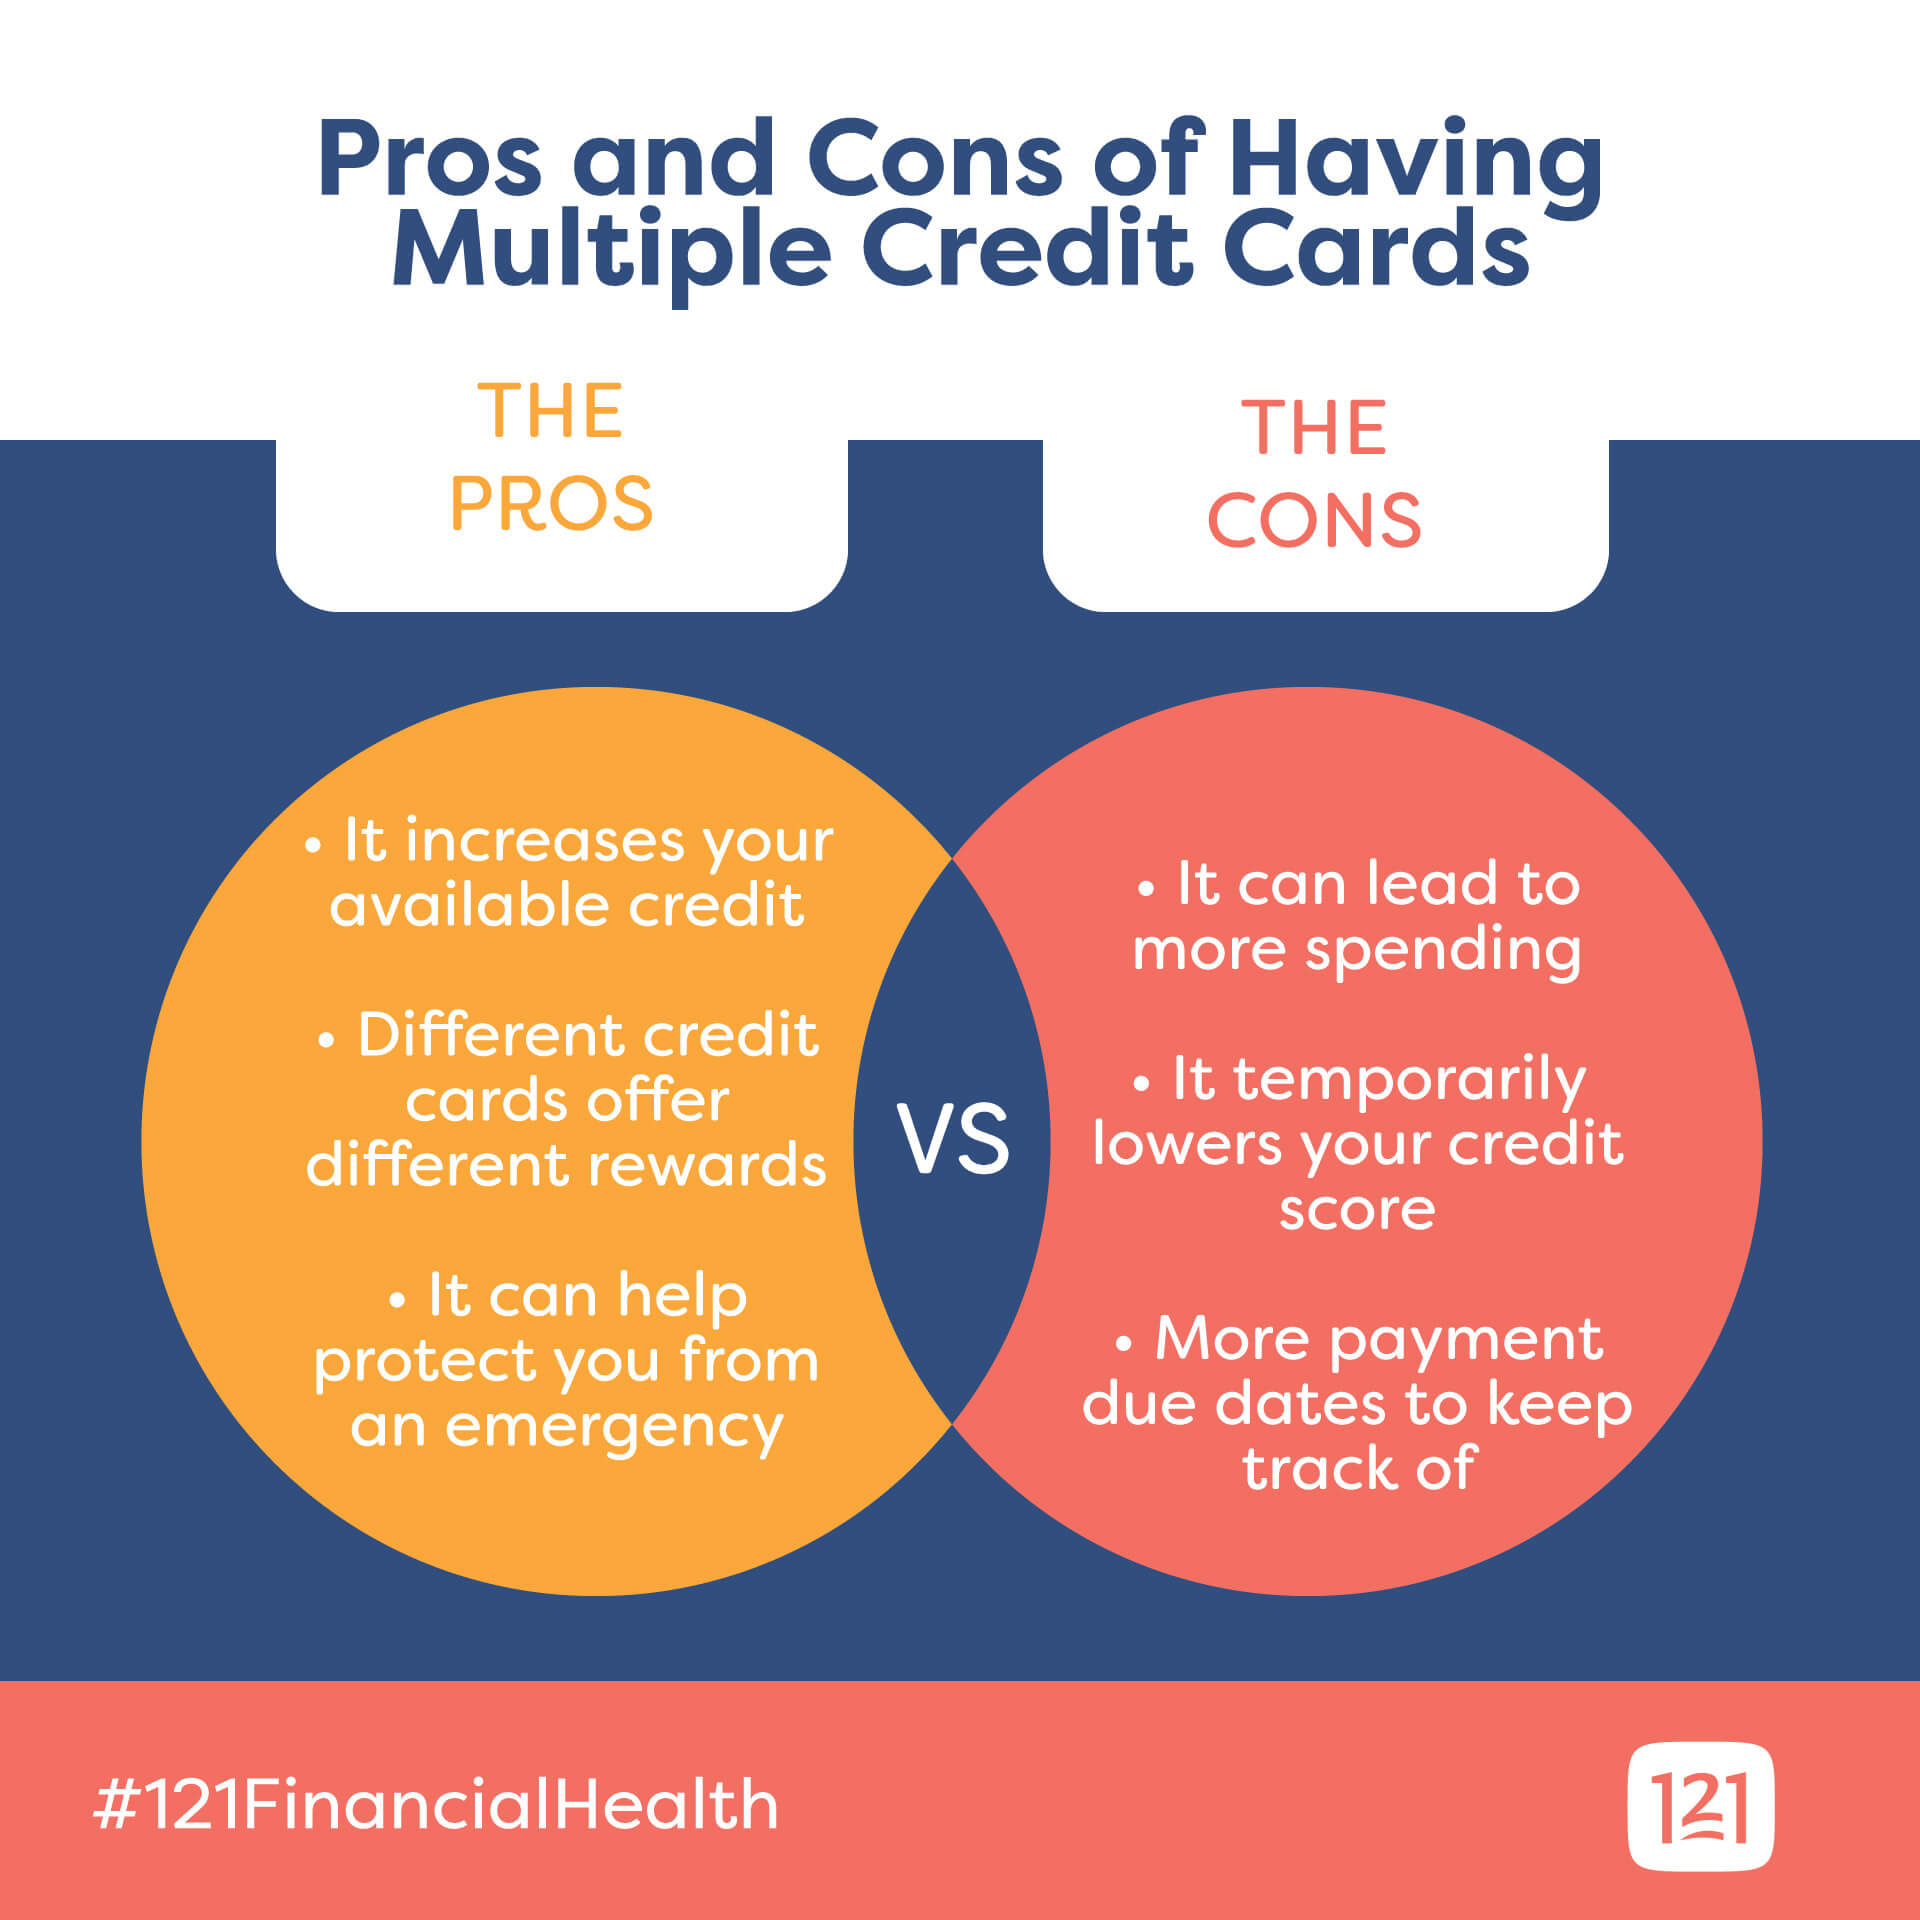 Pros and cons of having multiple credit cards